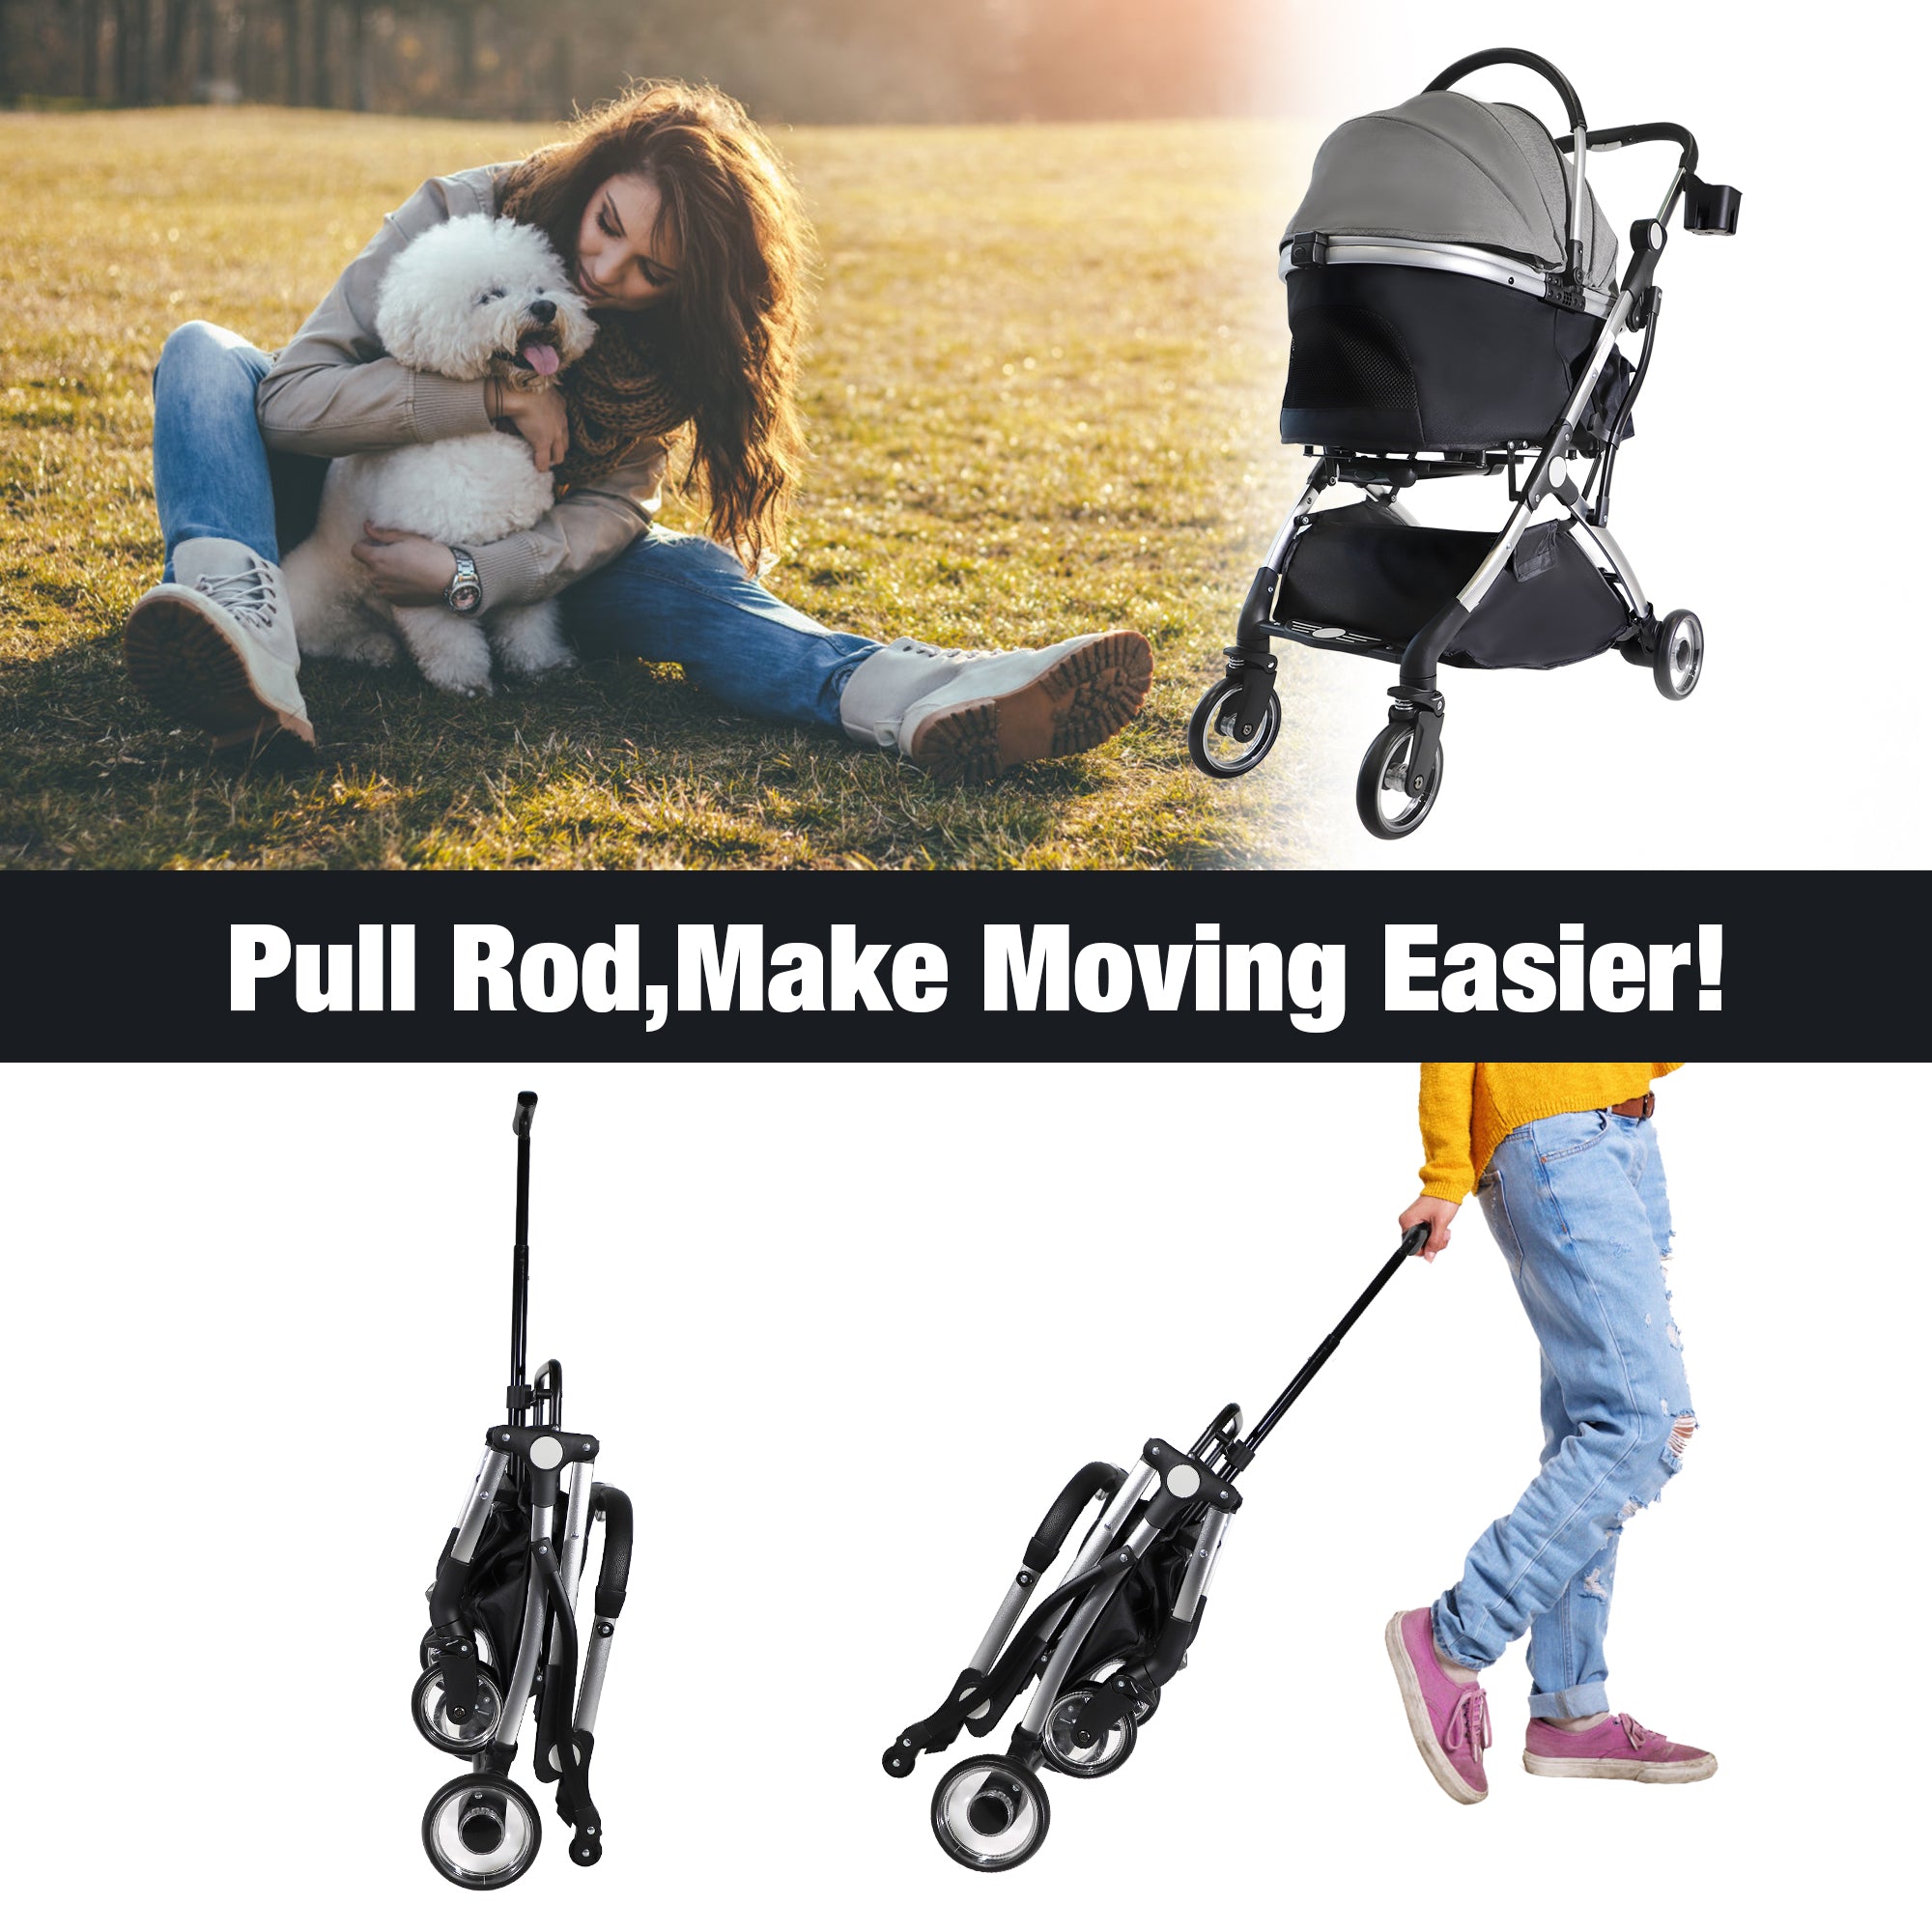 Foldable Pet Stroller 3 in 1 Design Detachable Carrier Telescopic Handle Aluminum Alloy Frame Up to 33 lbs Capacity Gray